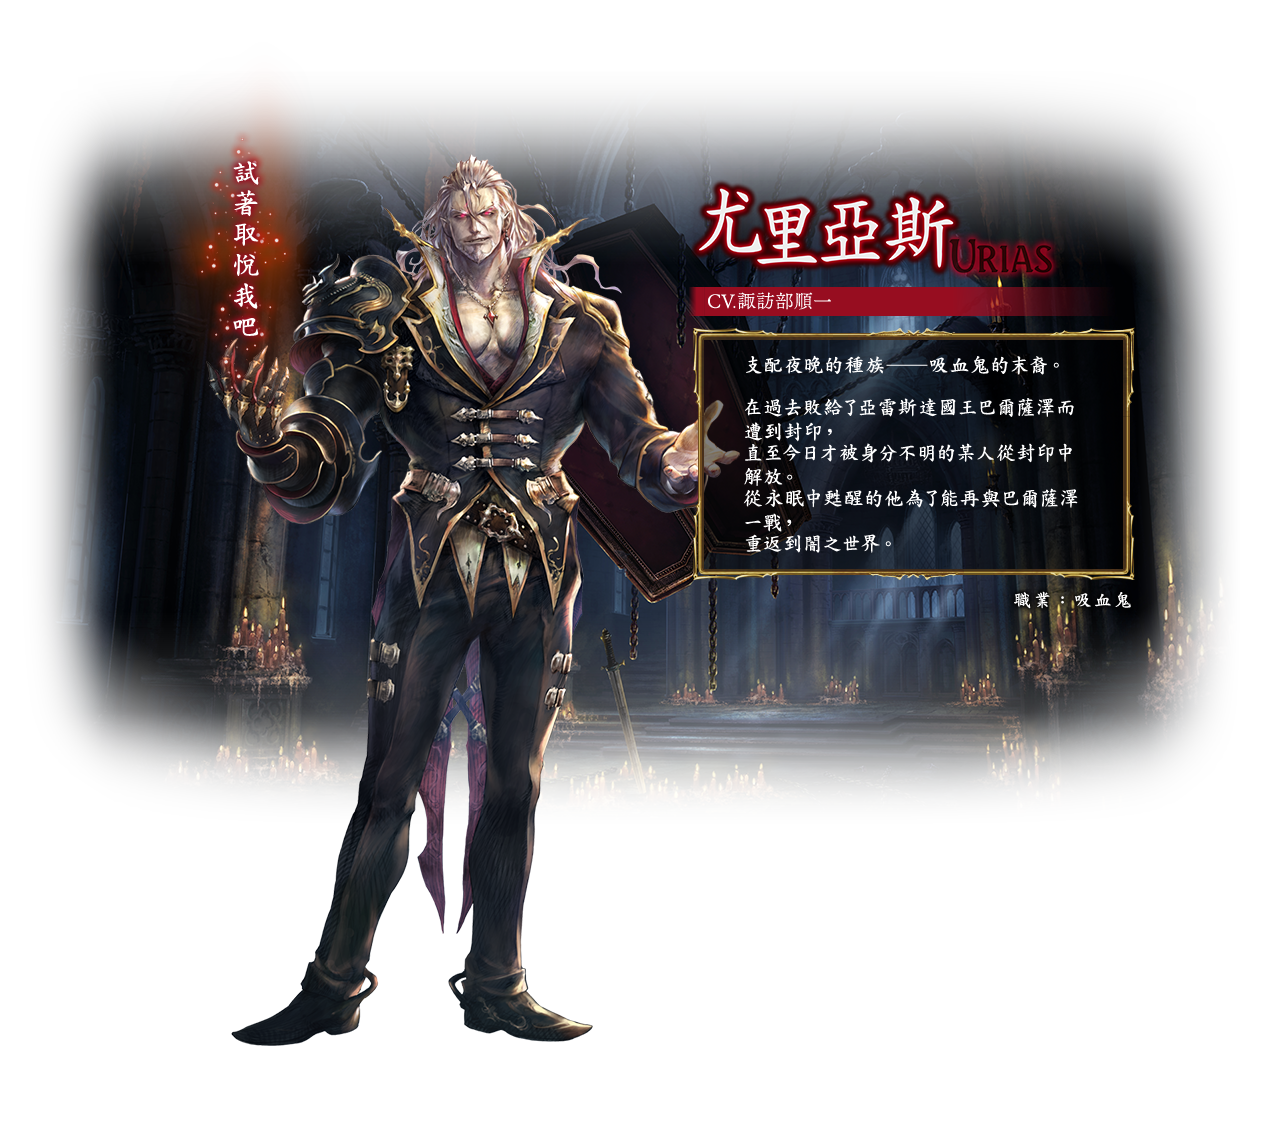 Urias / Class: Bloodcraft / Urias, the last of the vampires, has been awakened after centuries. He yearns for another fight with his bitter rival, King Balthazar.